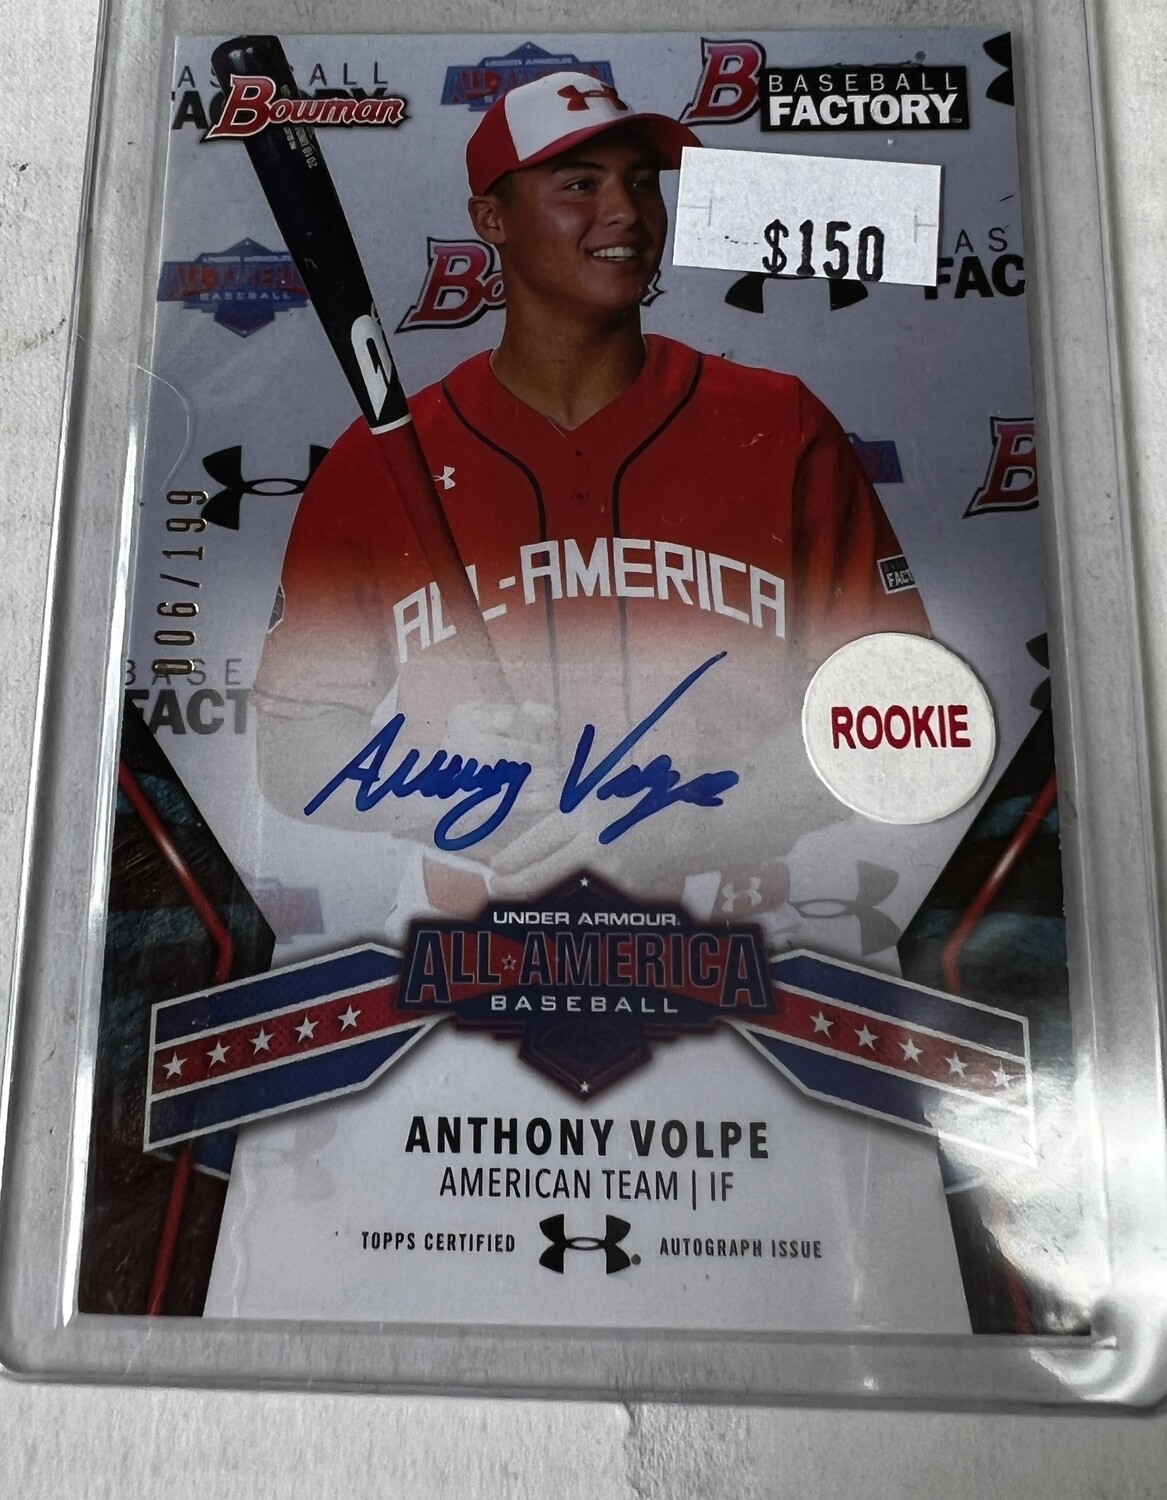 2018 Bowman All American Anthony Volpe Rookie Autographed